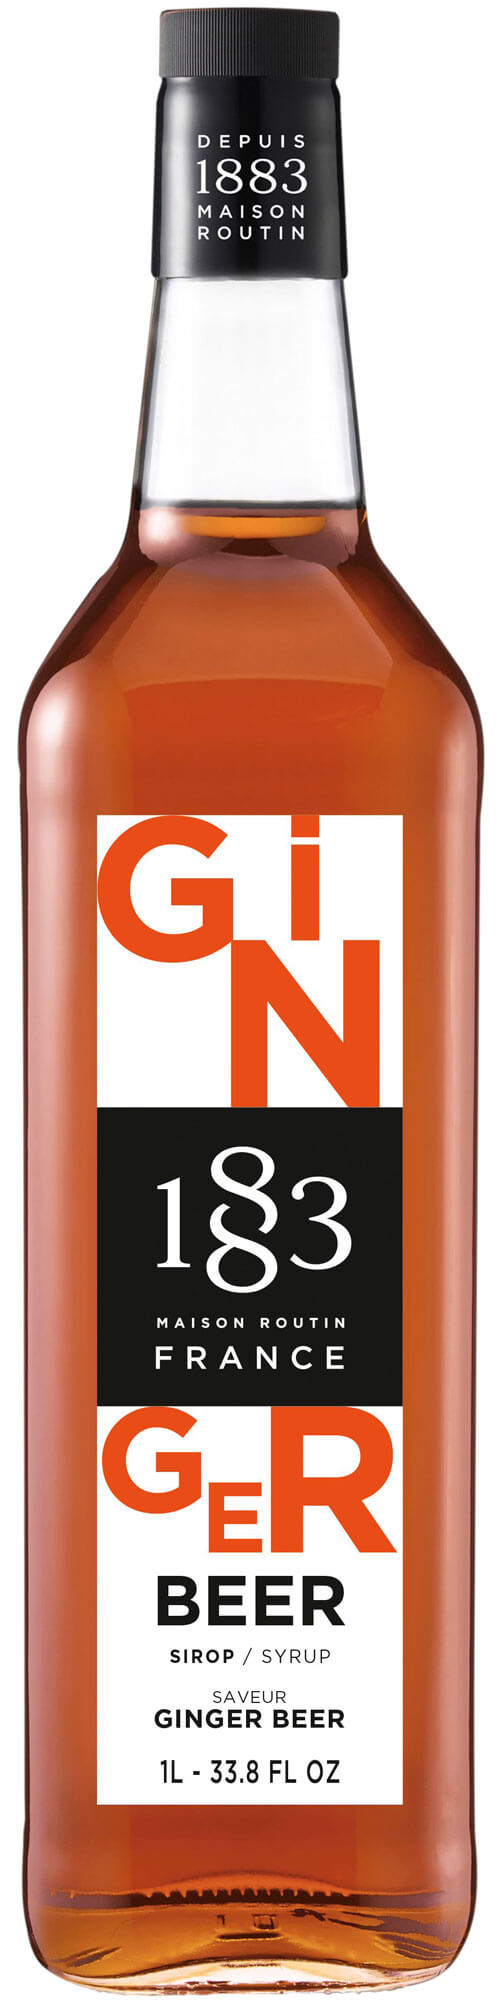 Ginger Beer - Maison Routin 1883 Sirup (1,0l)